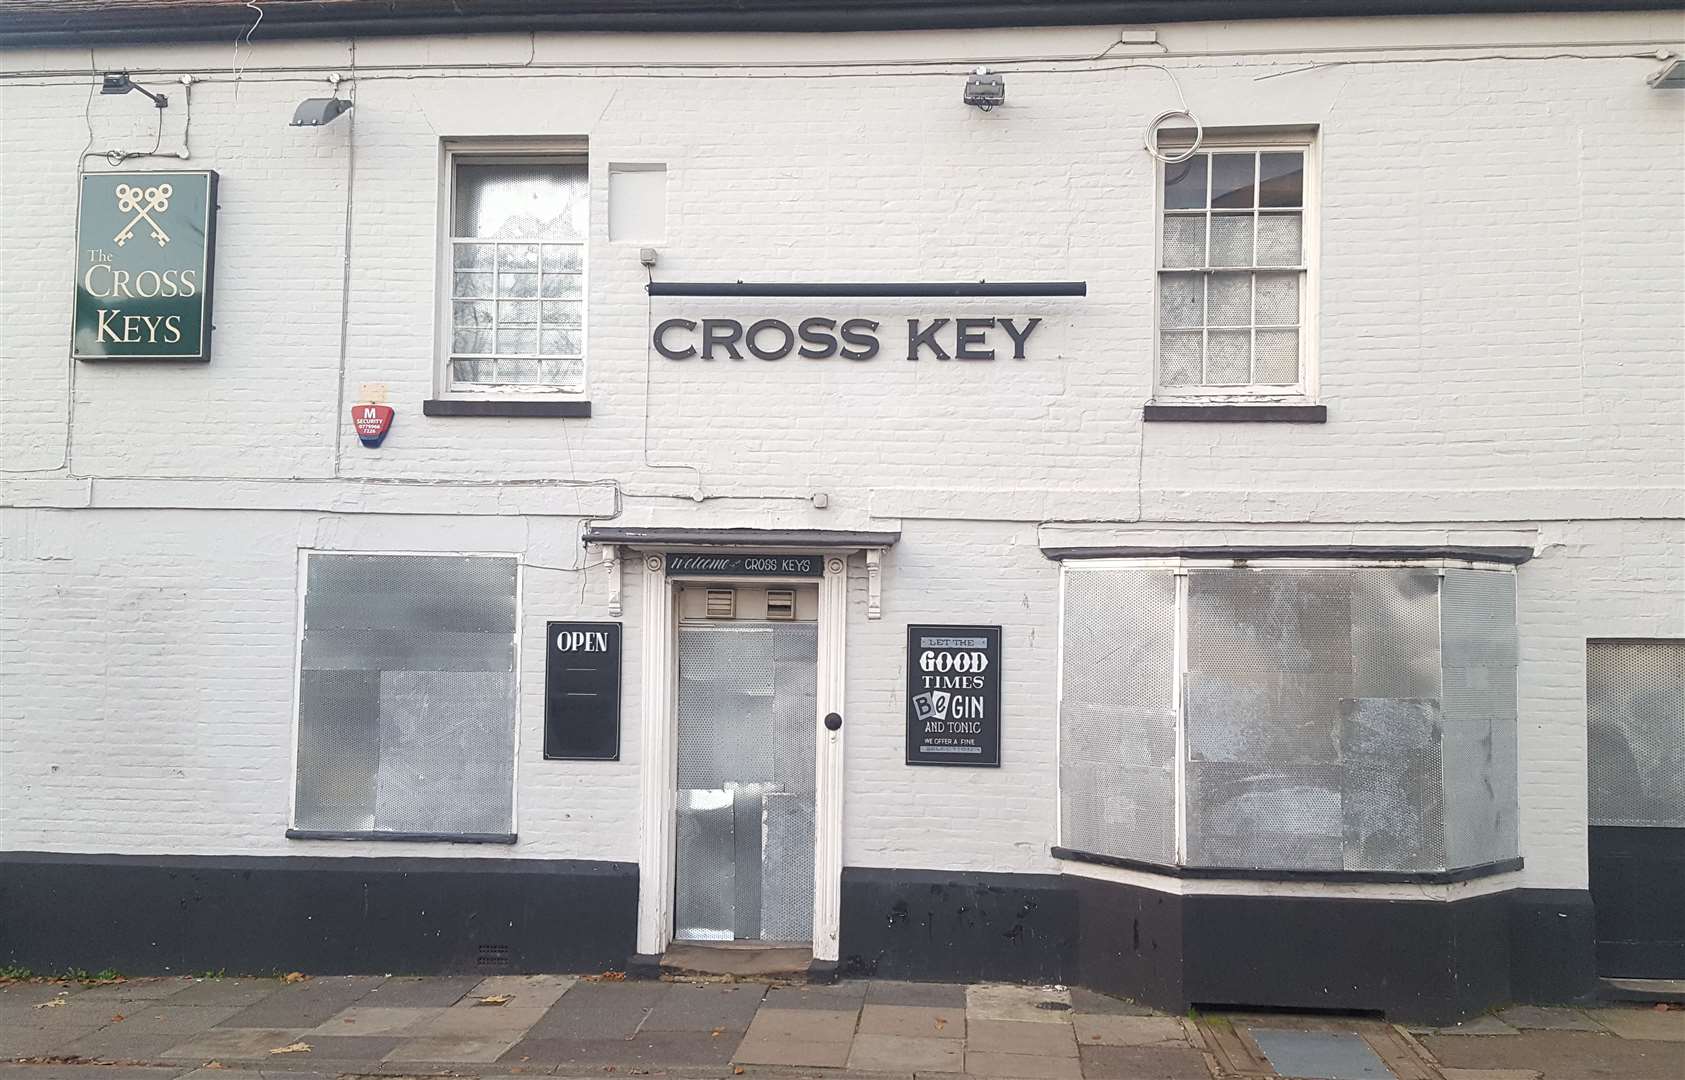 The Cross Keys pub in Canterbury has been sealed up for safety reasons